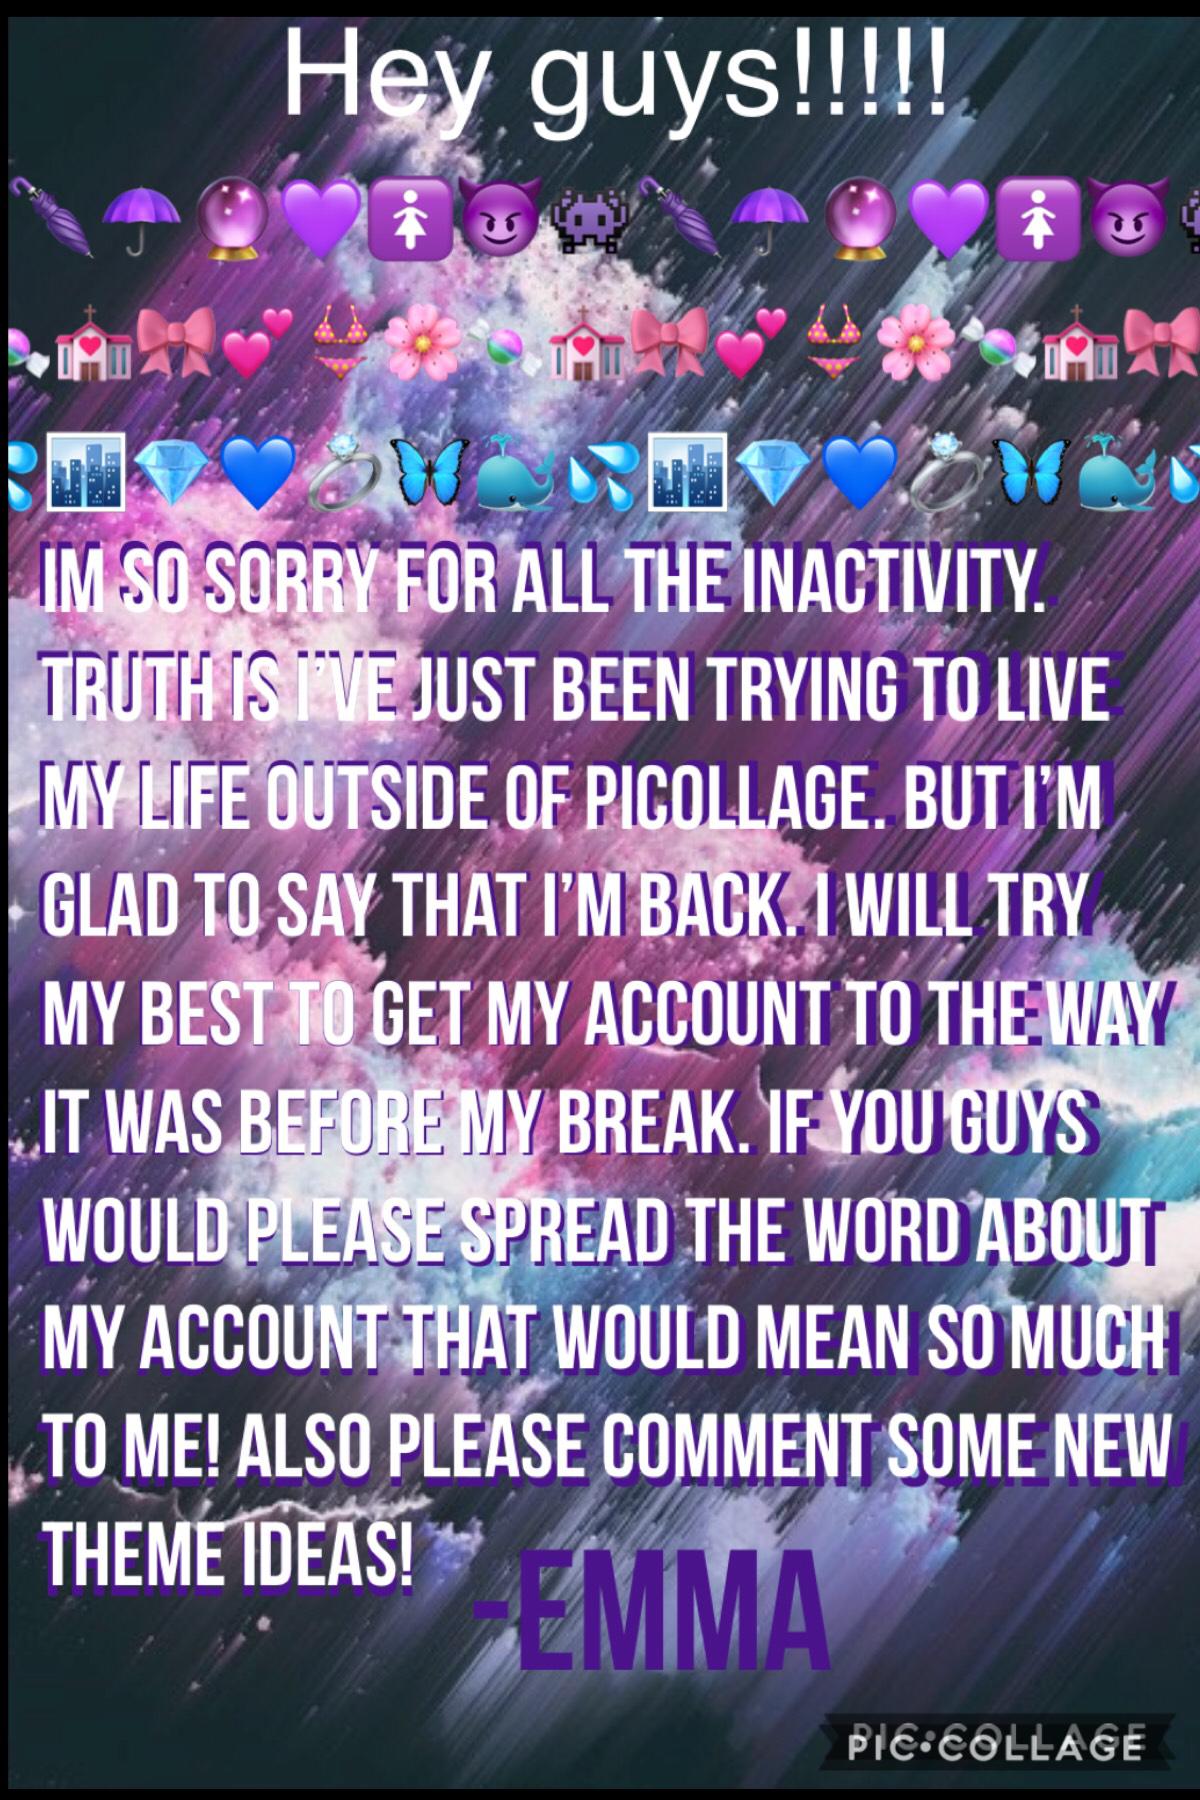 💜TAP💜
Guysssss im v sorry about all the inactivity! Please spread the word about me coming back! It would mean a lot ❤️❤️❤️❤️❤️